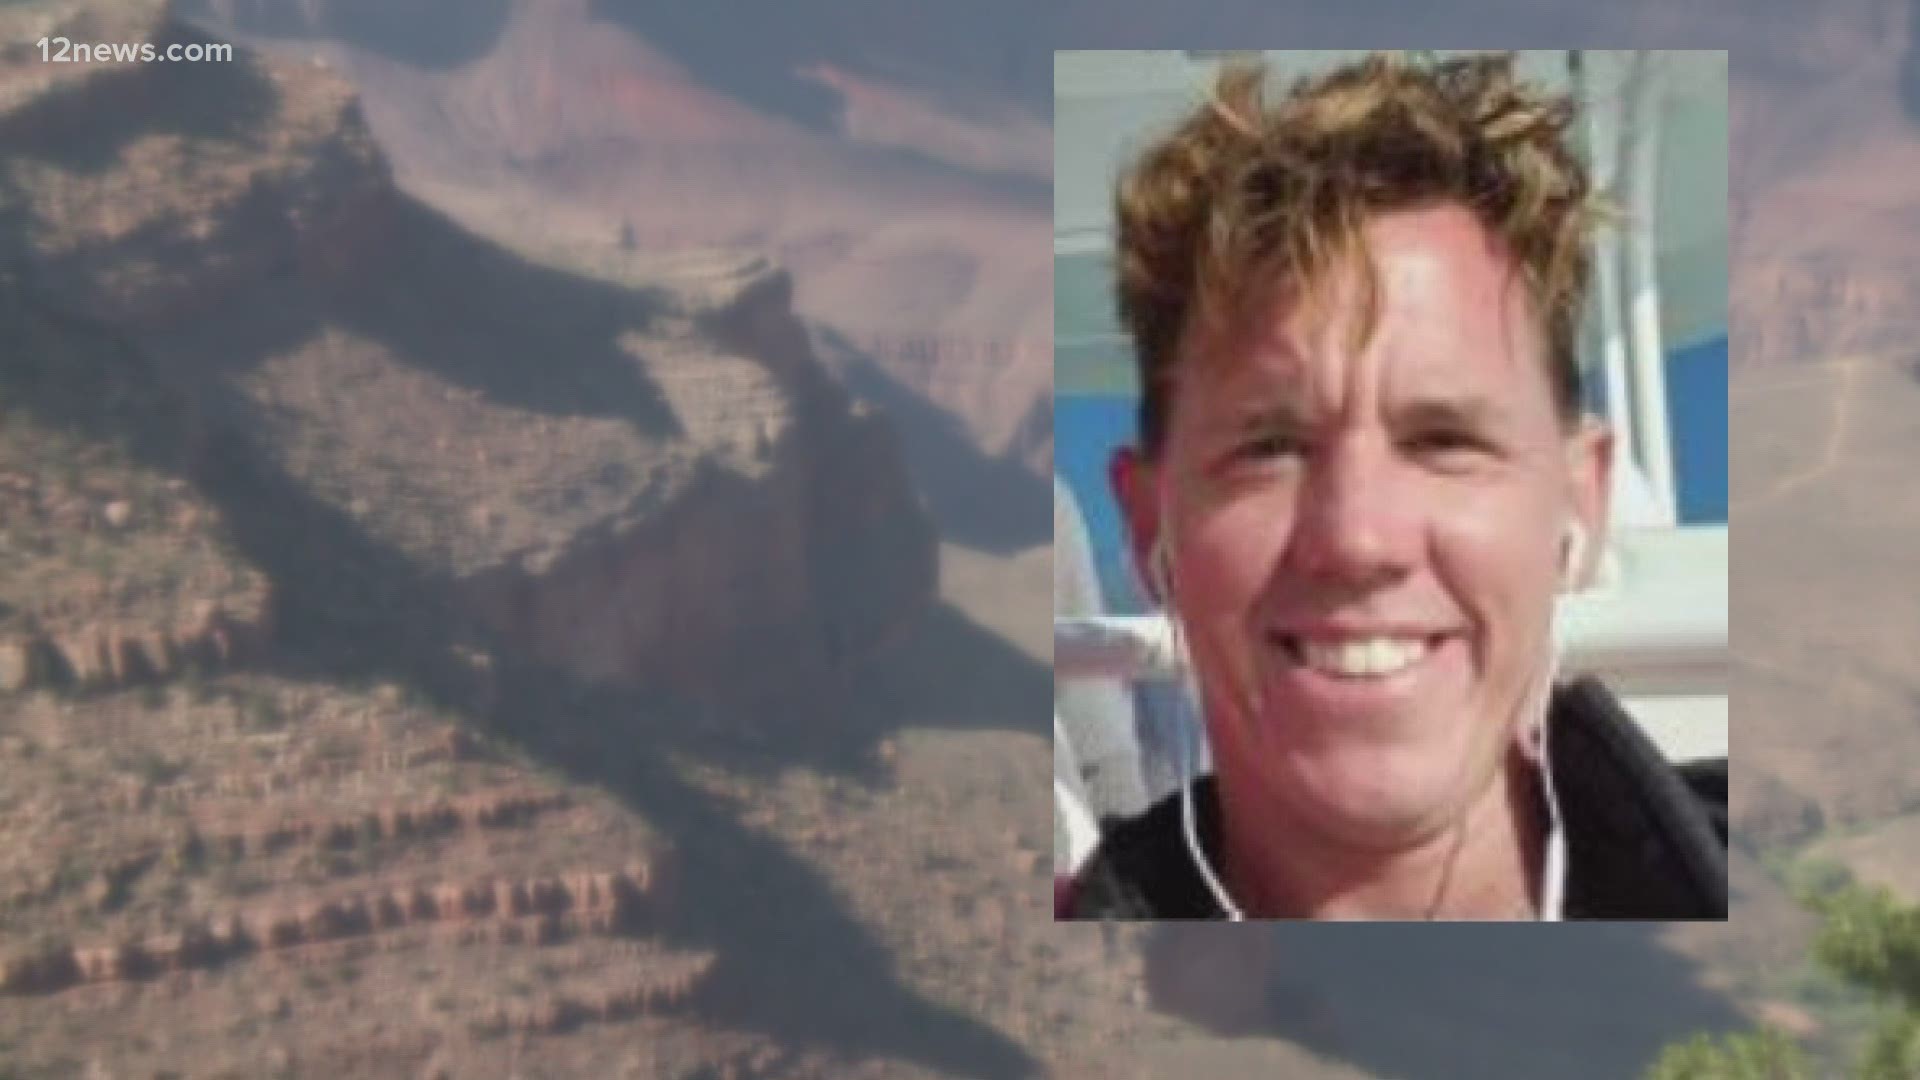 Grand Canyon National Park officials said a body believed to be 40-year-old John Pennington was found below the South Kaibab Trailhead.